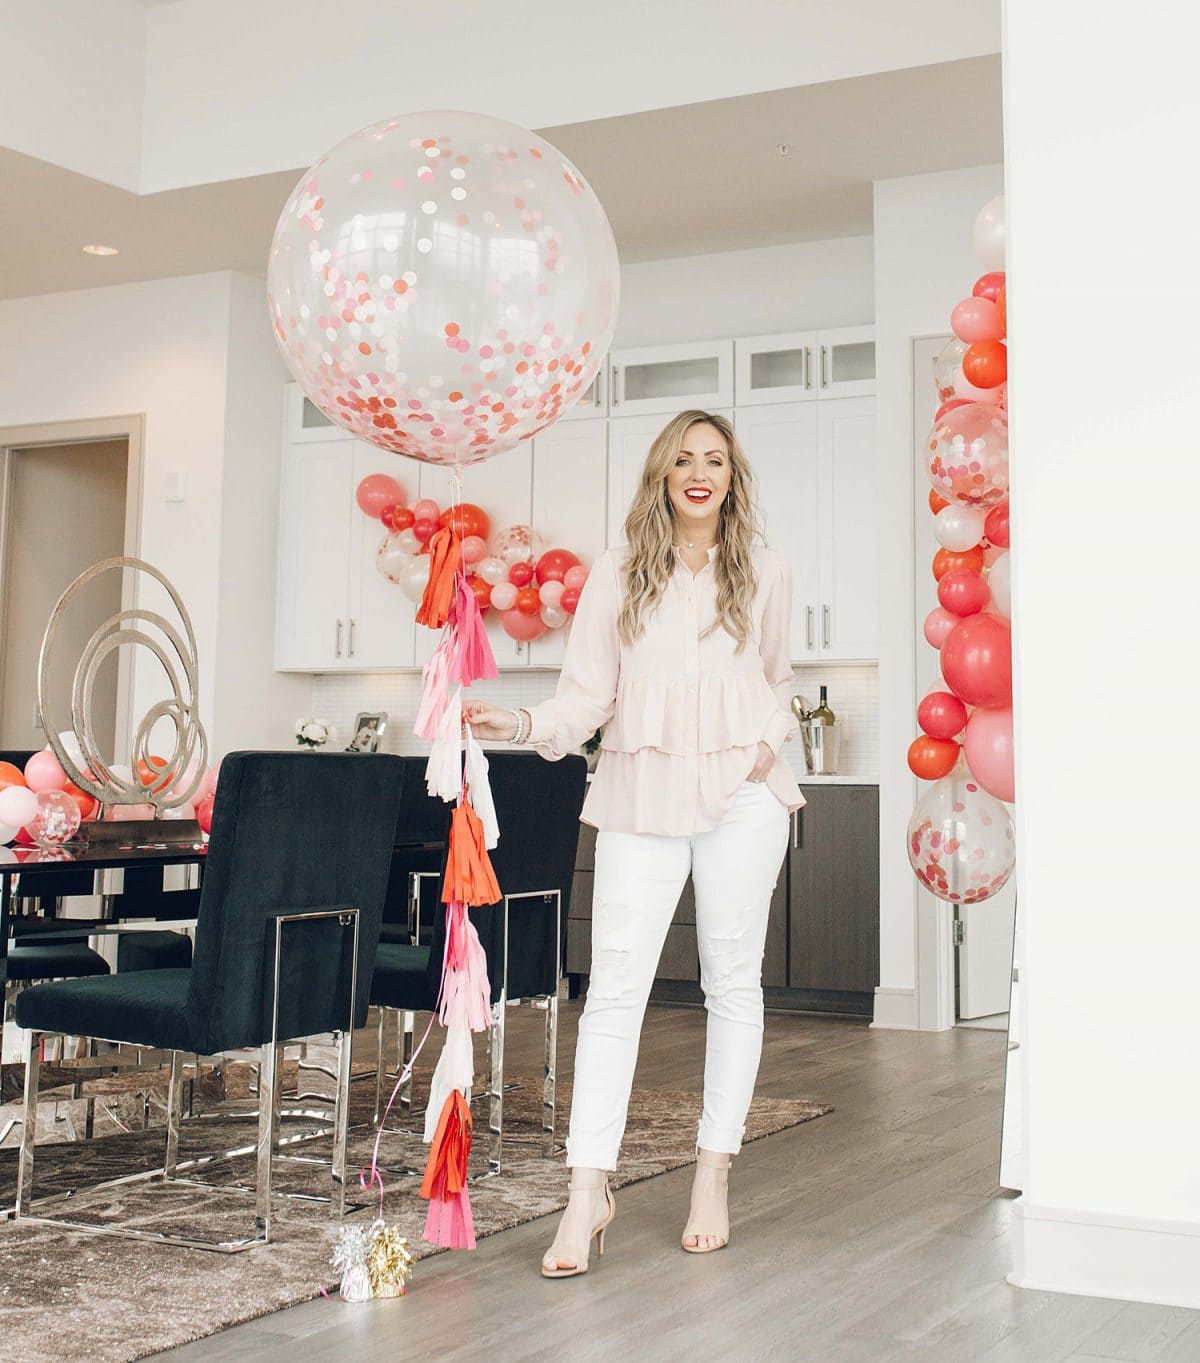 Houston blogger Meg O. shares a Galentine's Day Party at Latitude Med Center - a Houston luxury high rise apartment building